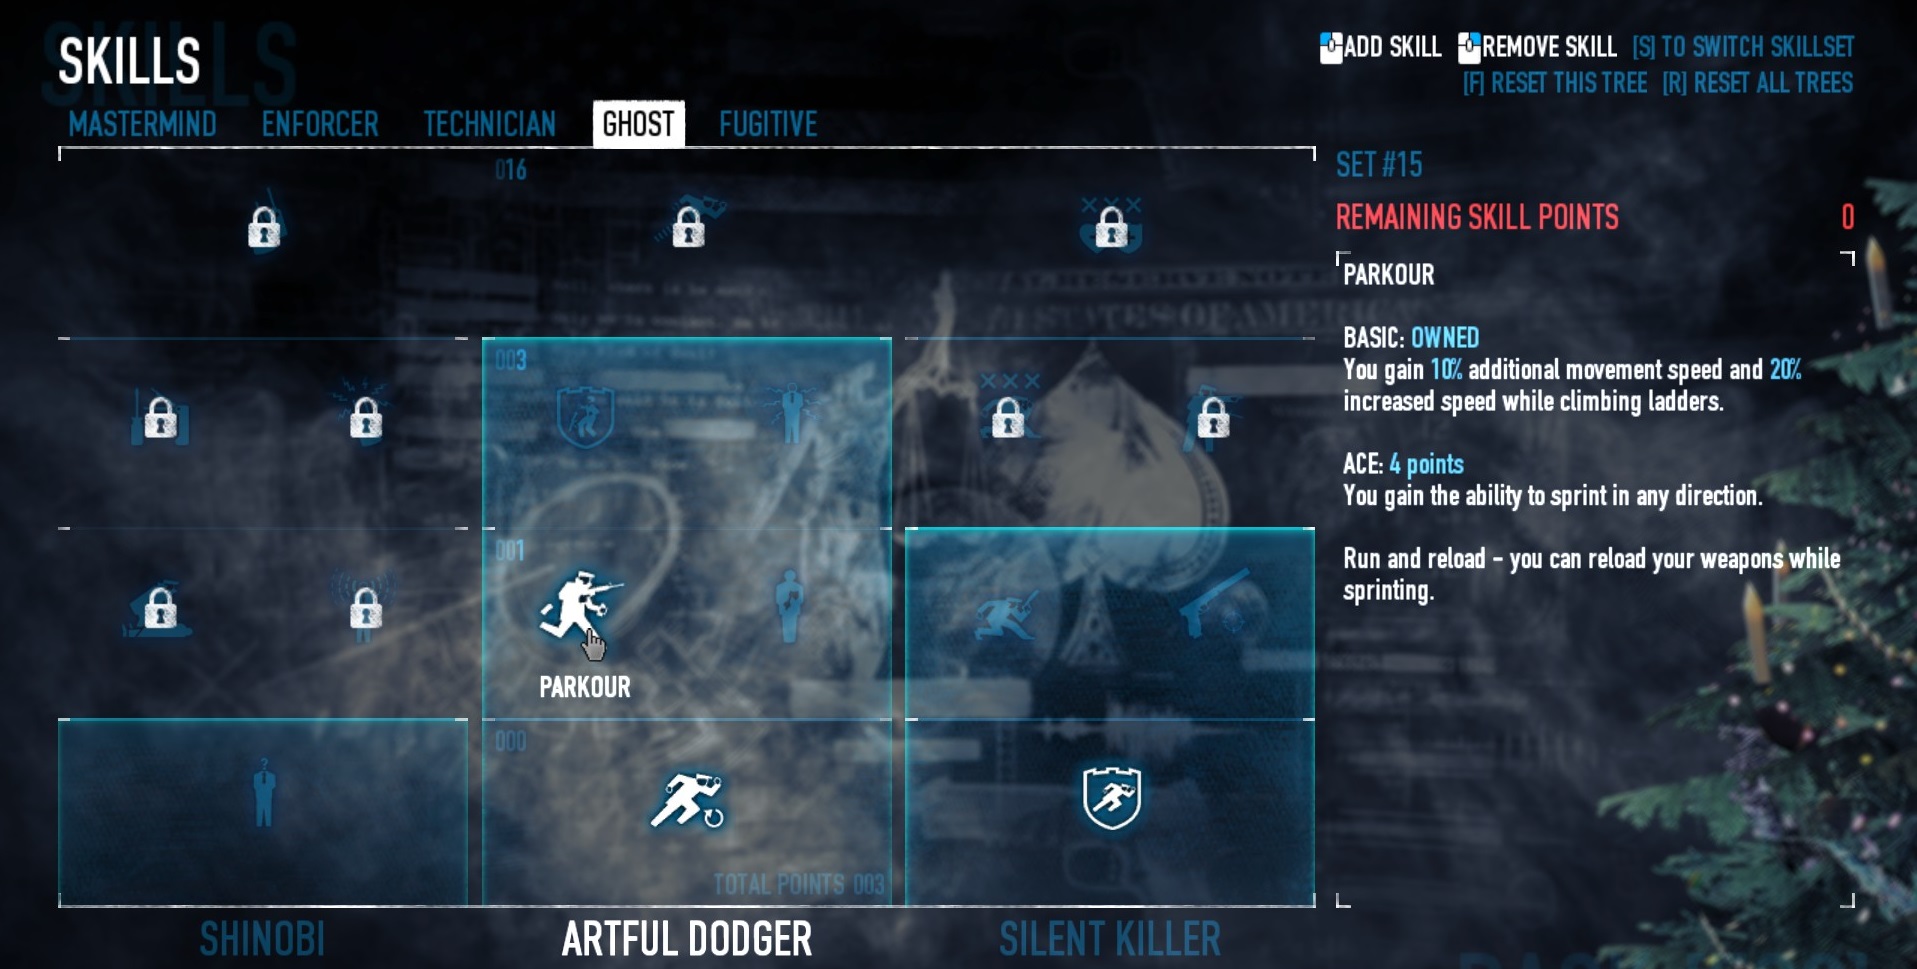 PAYDAY 2 - Leech Build Guide - SKILLS (GHOST) - 48E0CB2